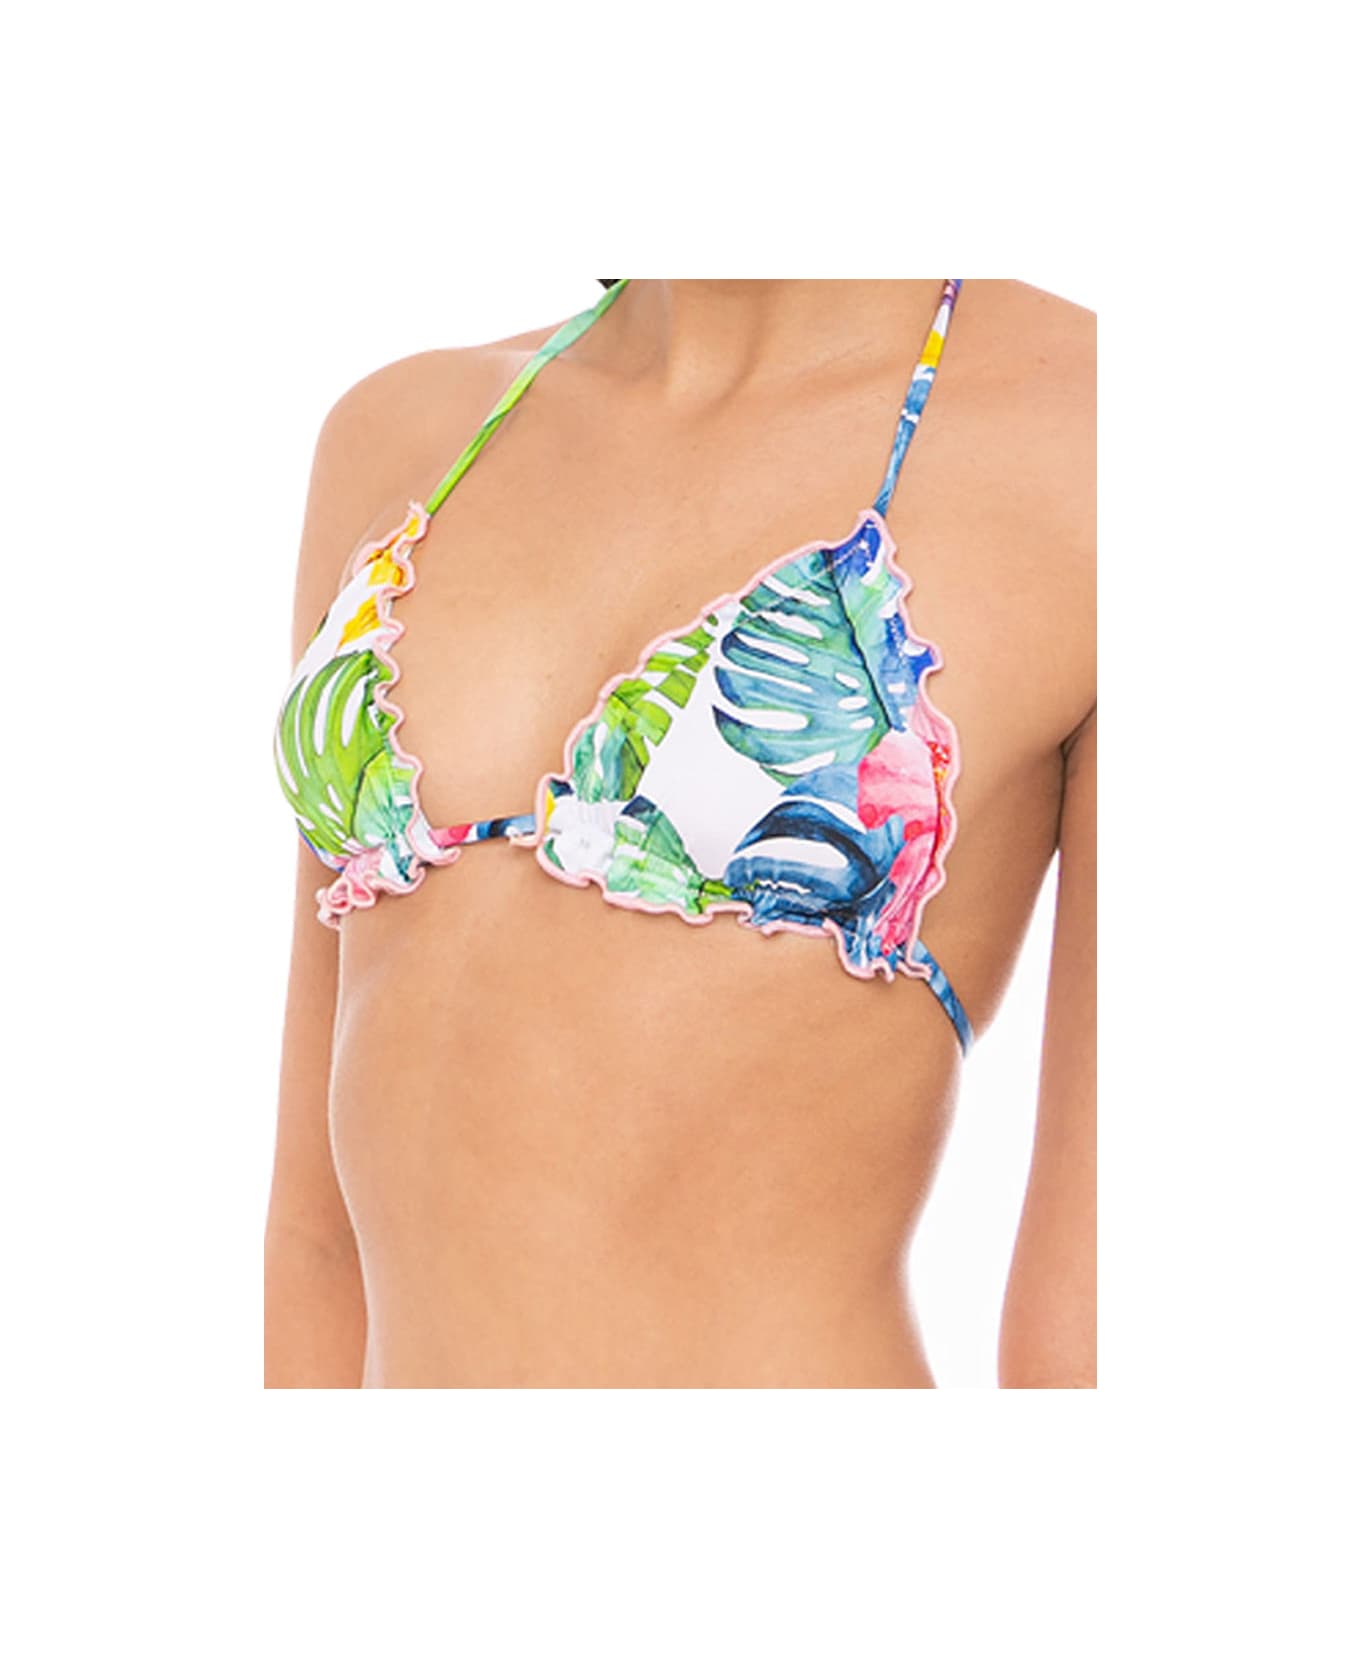 MC2 Saint Barth Woman Triangle Top Swimsuit With Tropical Print - MULTICOLOR